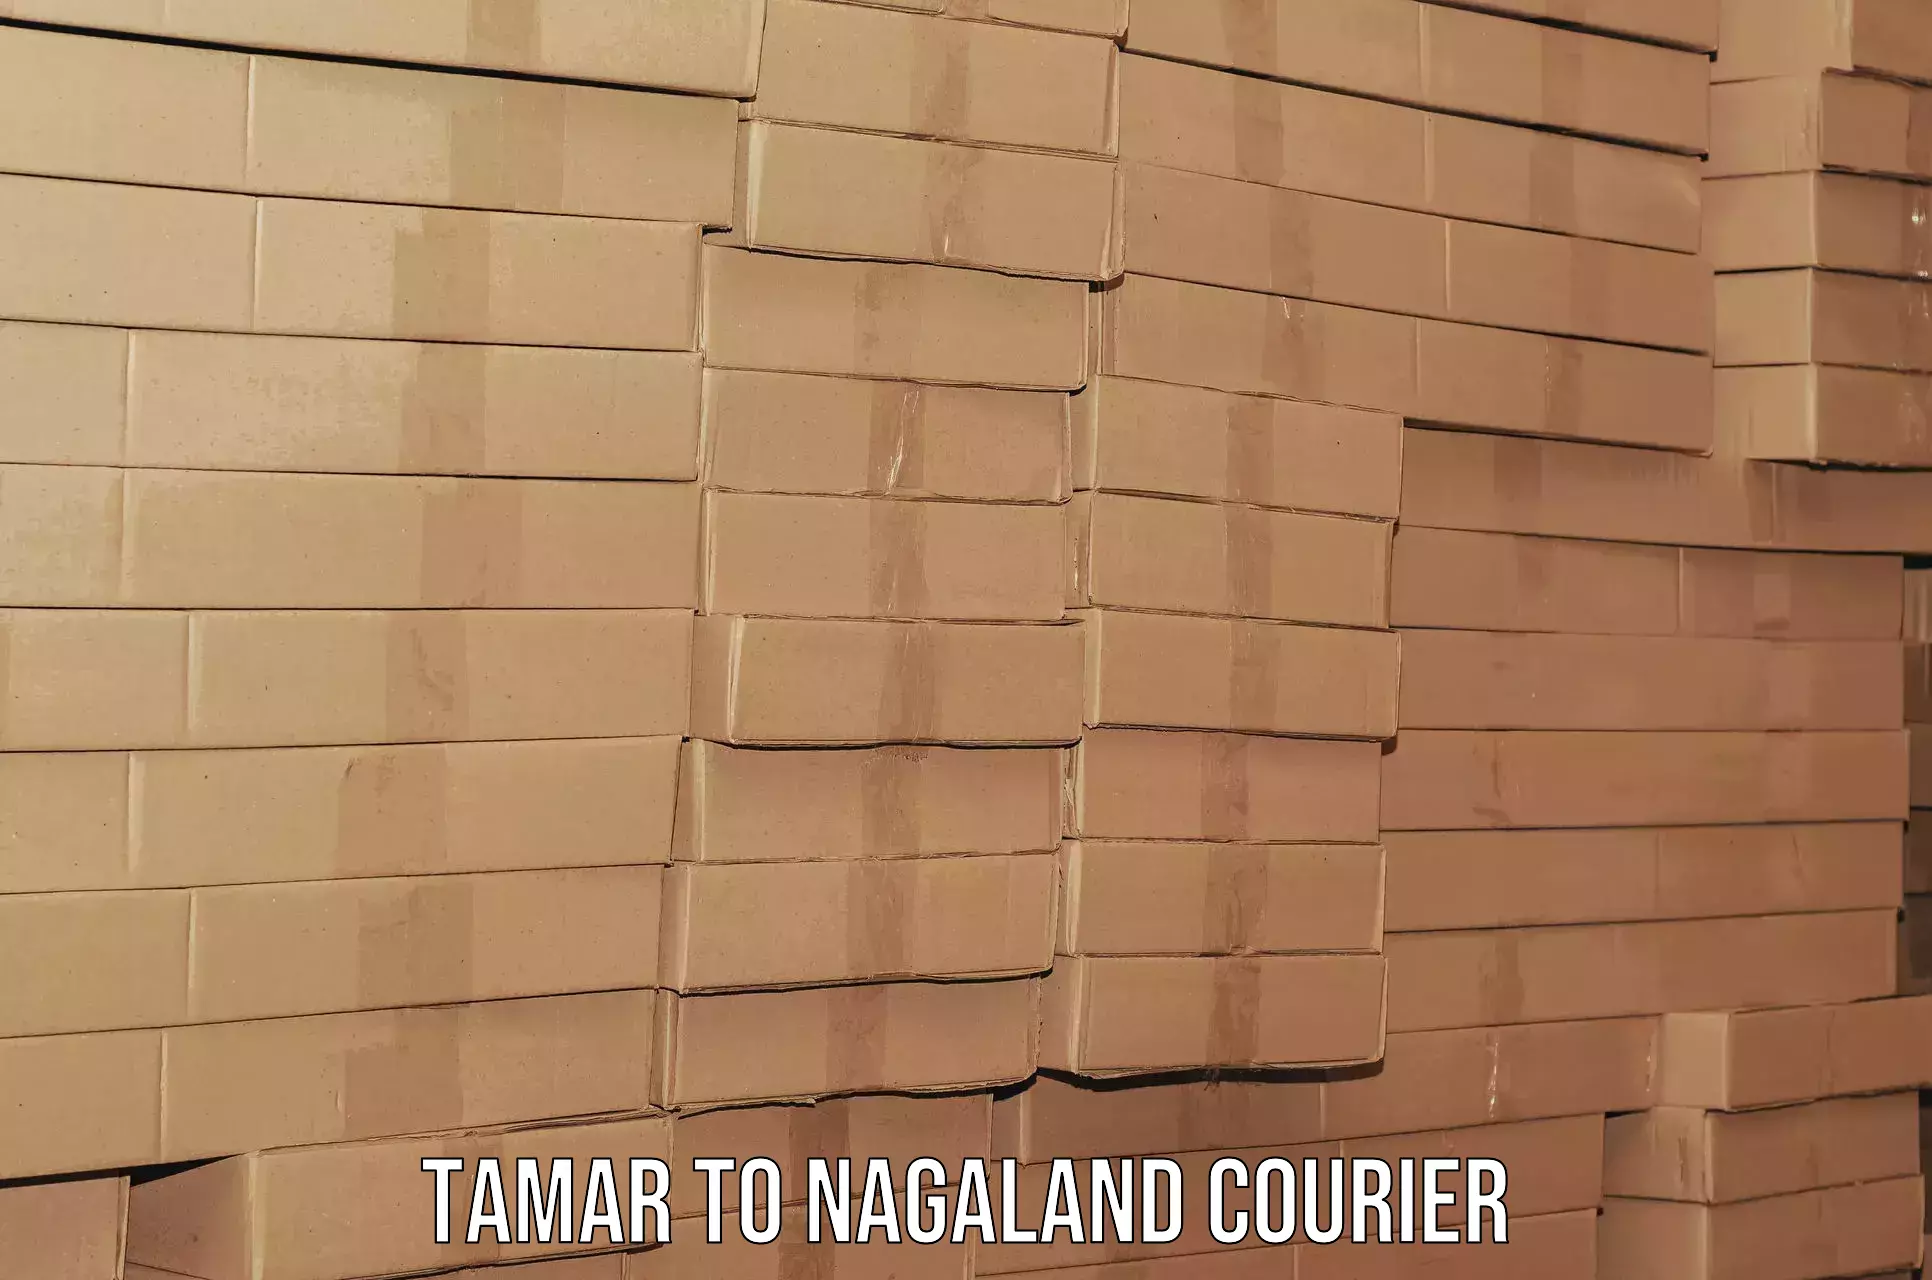 Specialized moving company Tamar to Nagaland